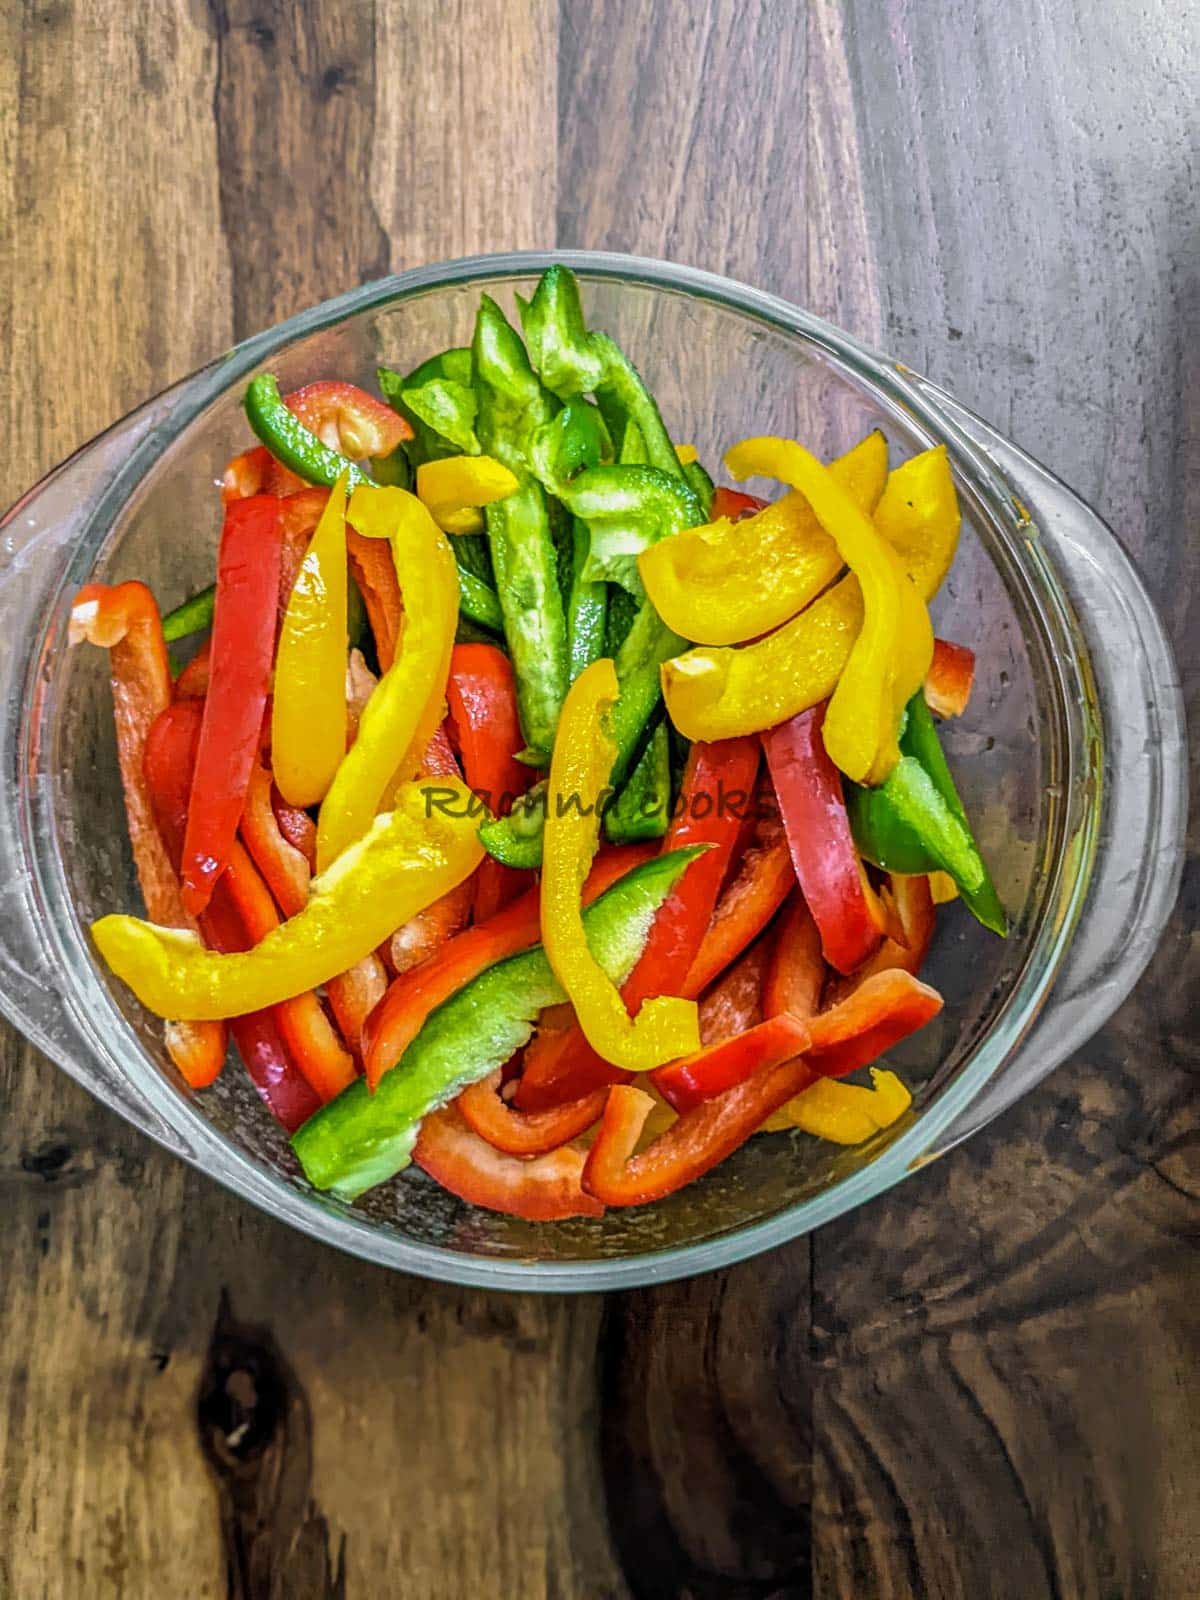 Bell peppers cut into strips